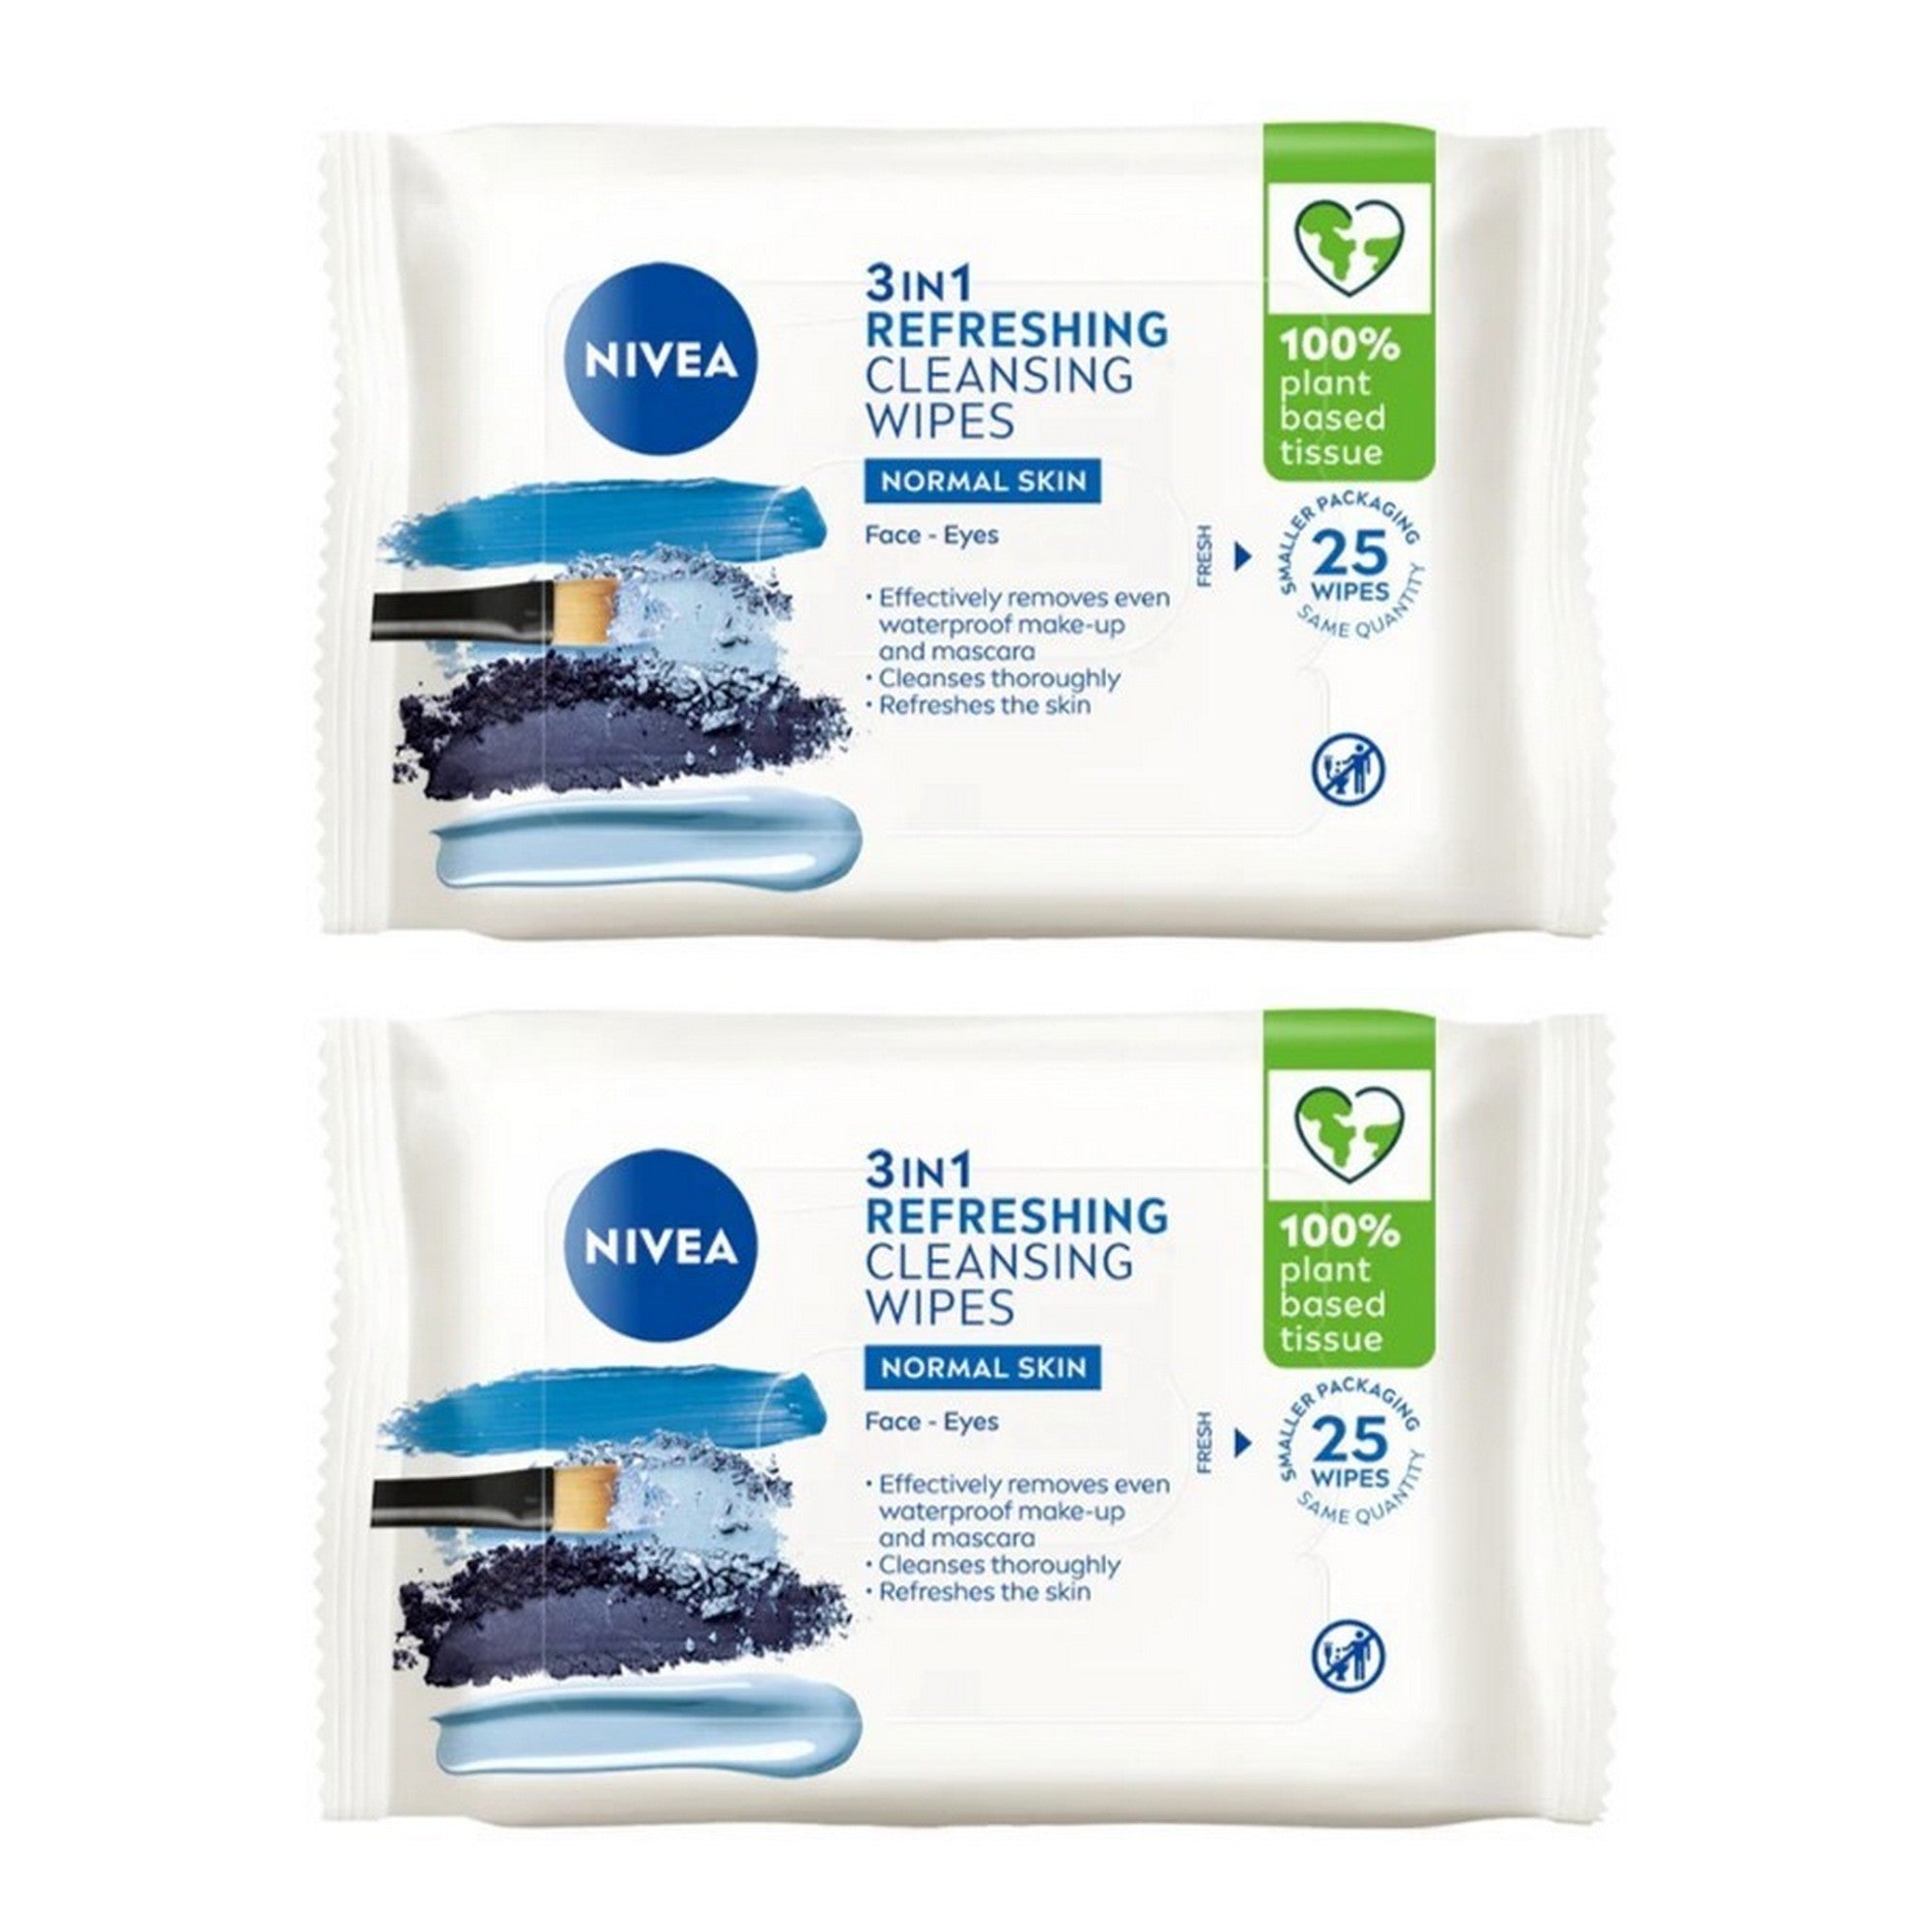 Nivea Normal Skin Biodegradable Wipes 25S Twin Pack